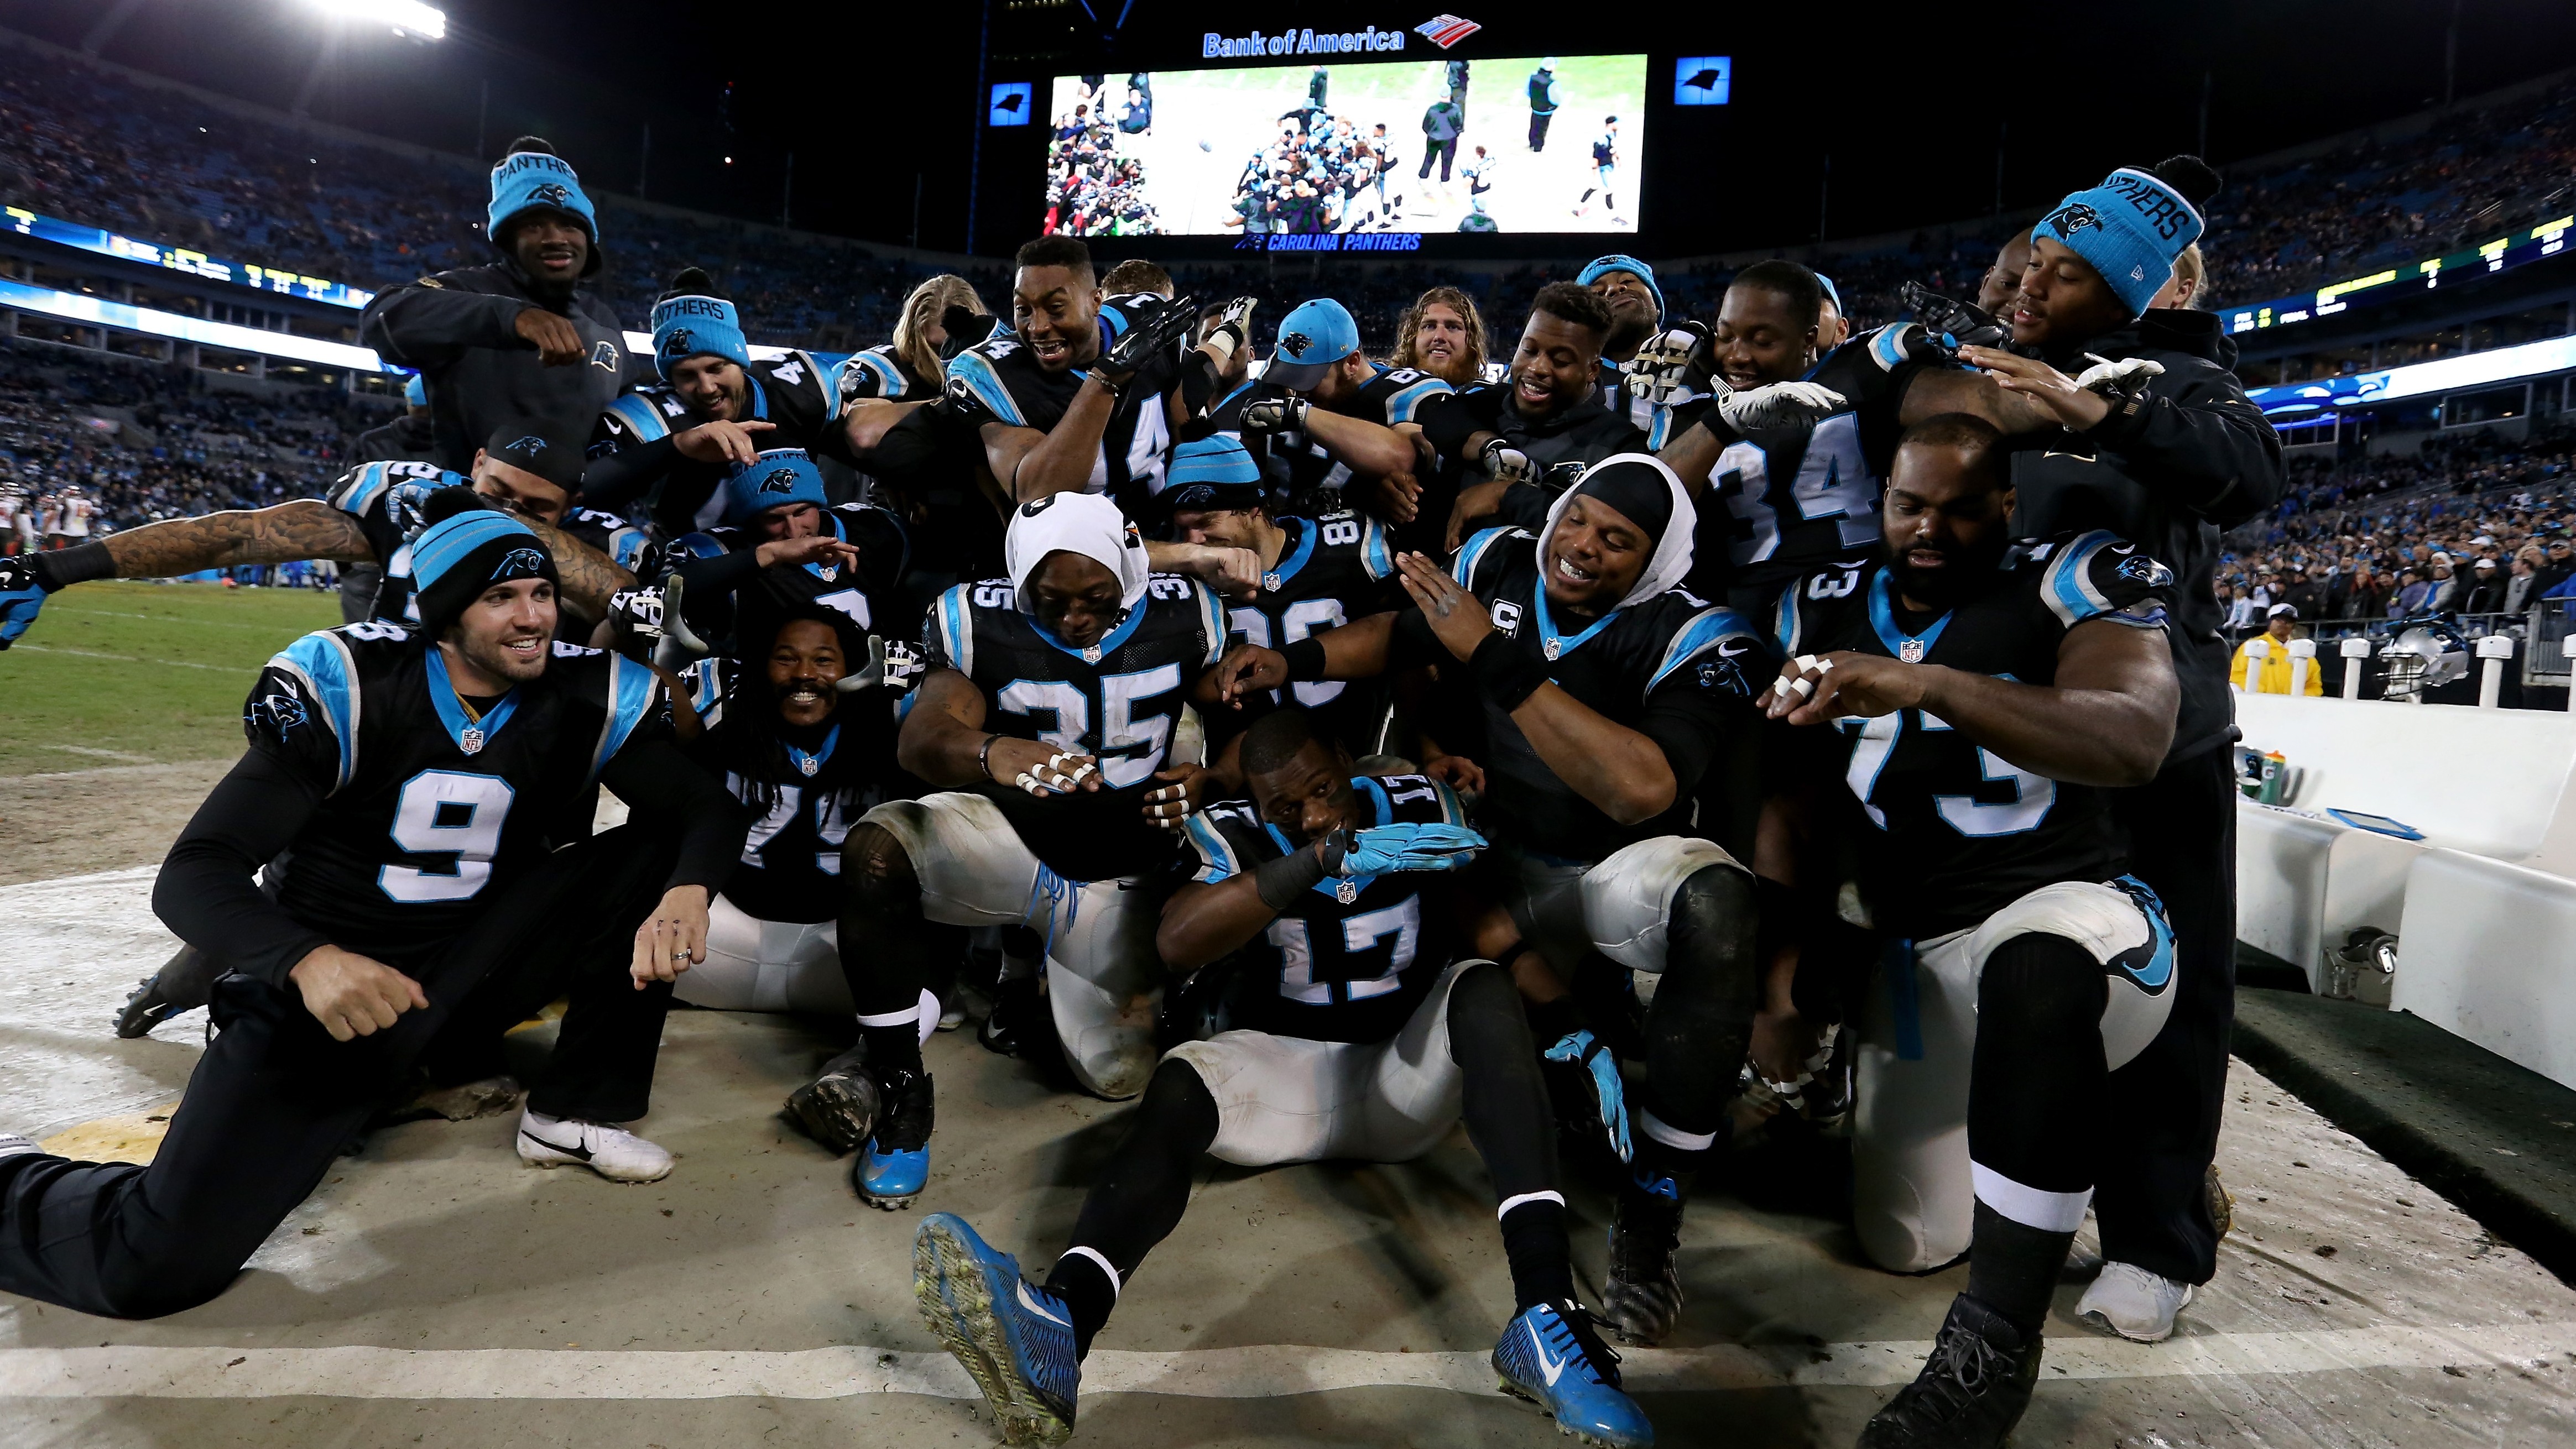 Panthers Playoff Schedule Opponent, Date, Time, TV Info